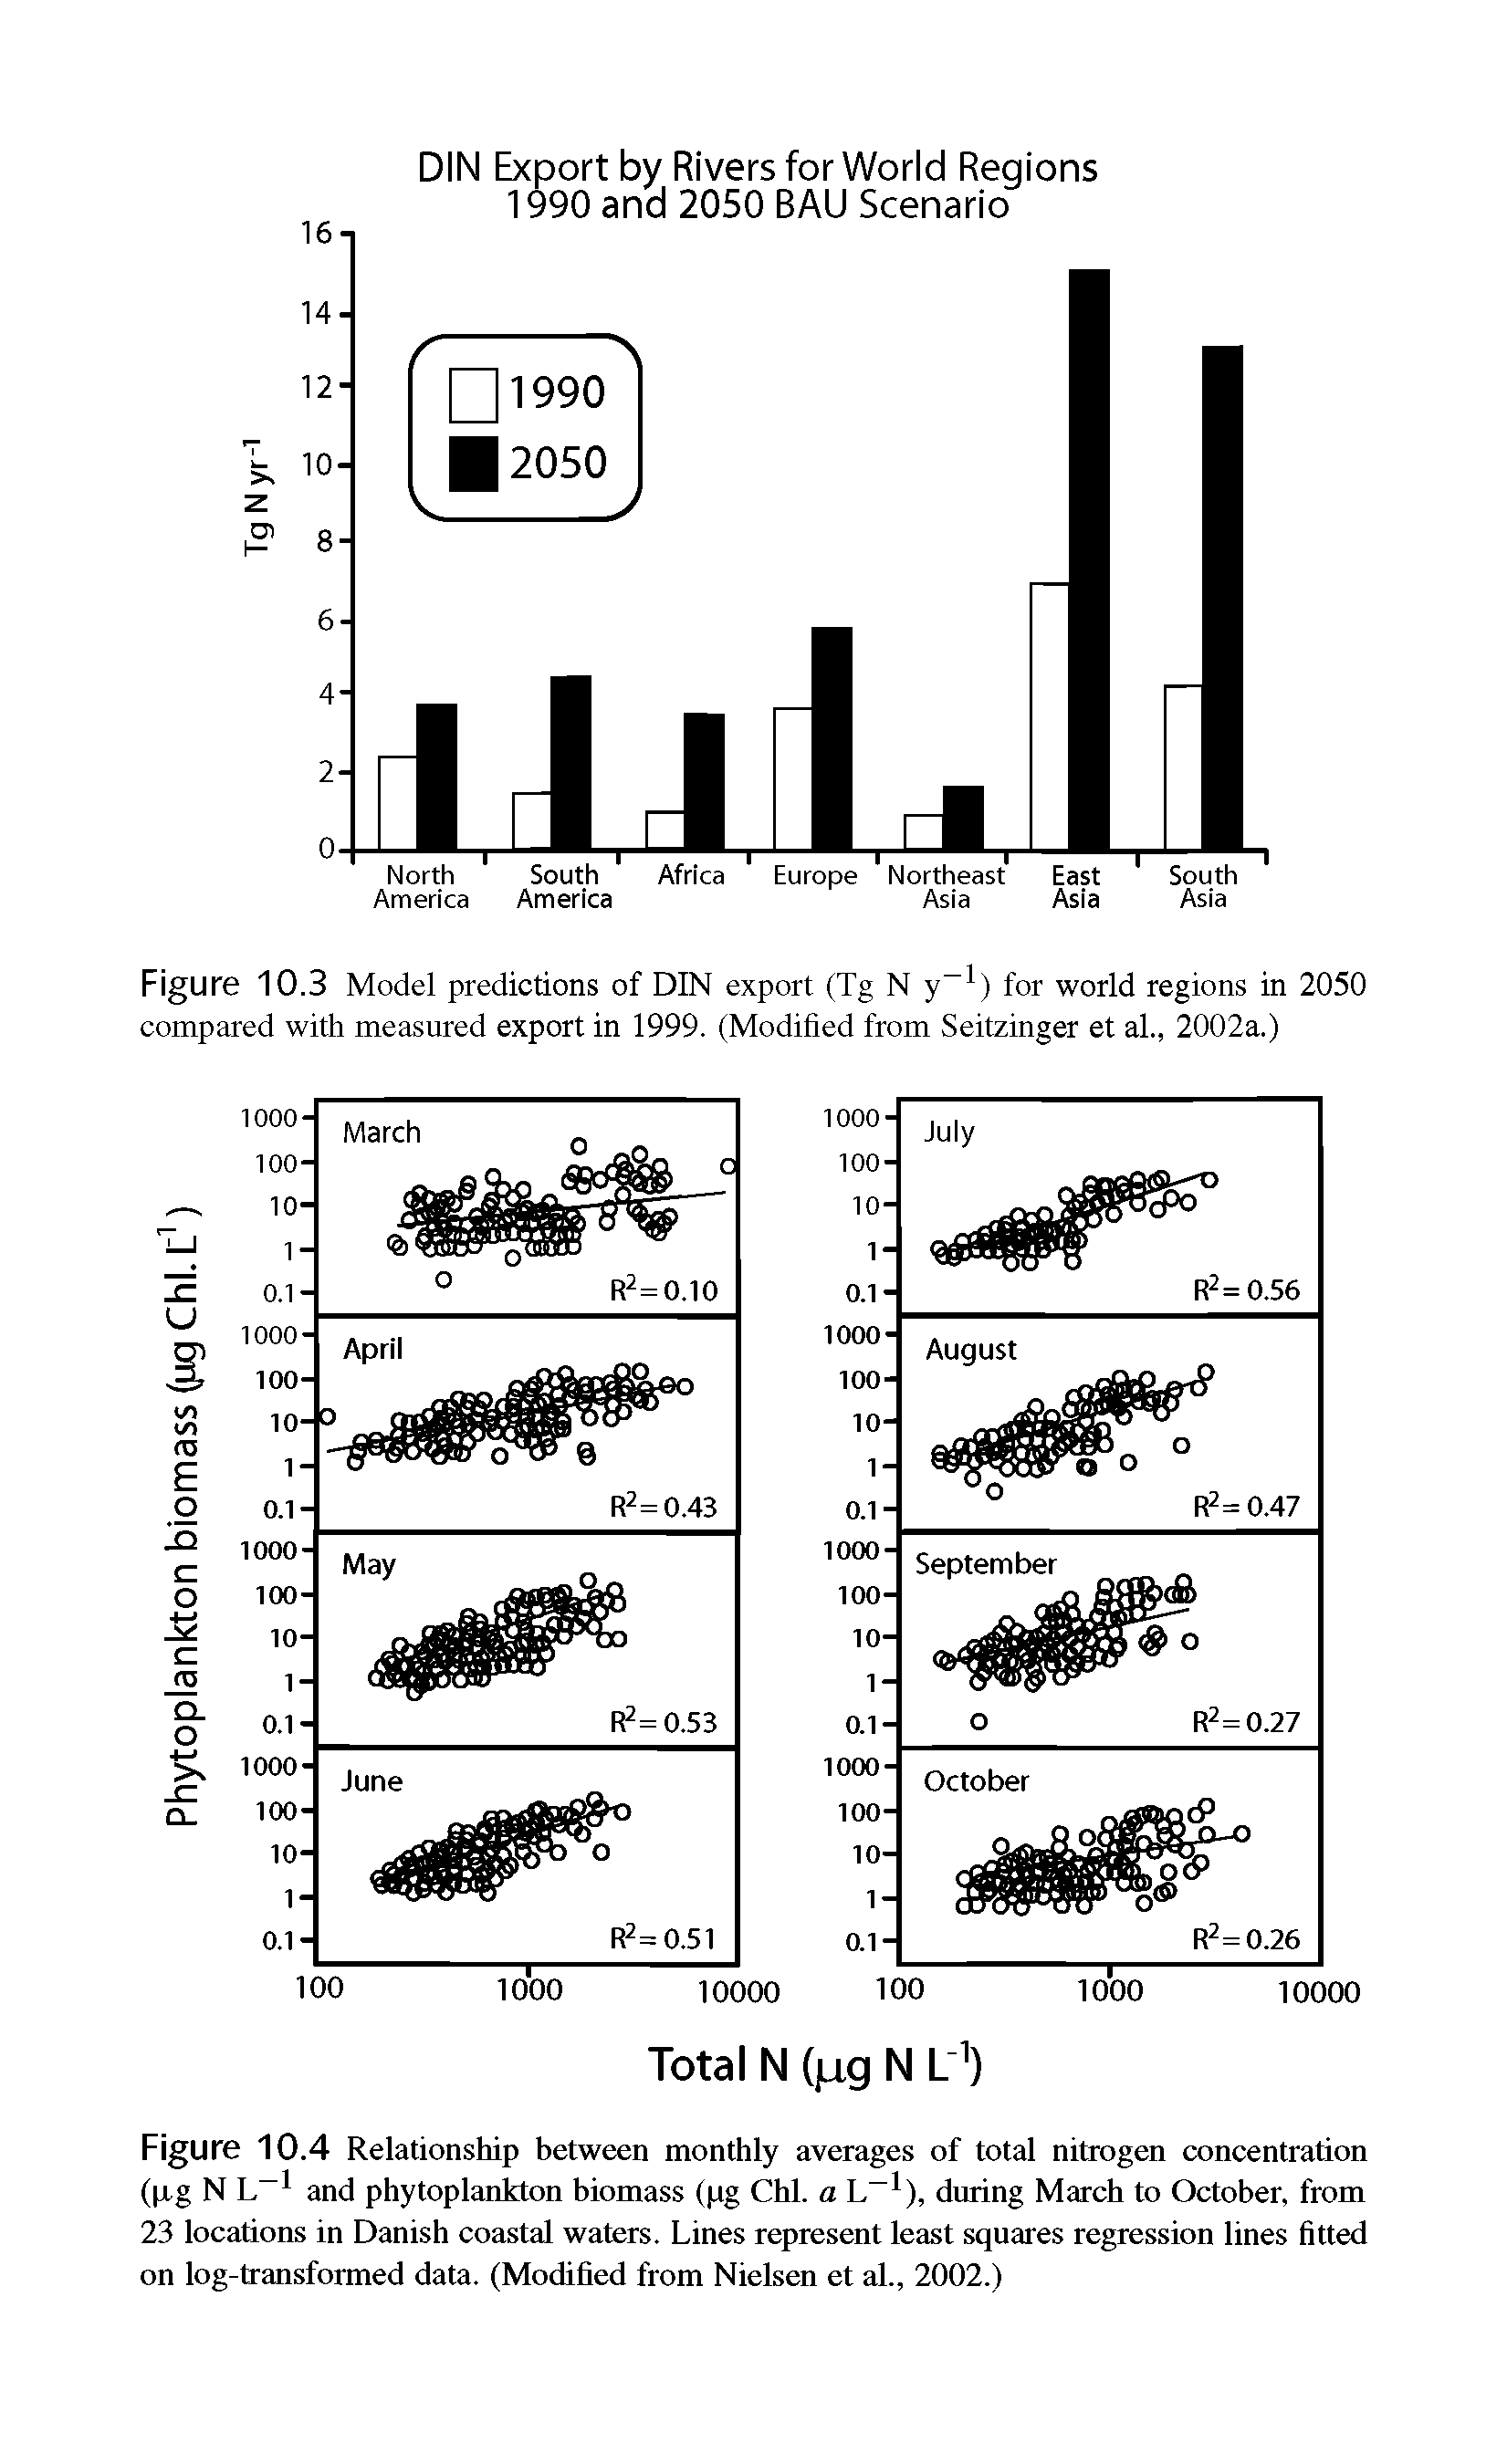 Figure 10.4 Relationship between monthly averages of total nitrogen concentration ( xg N L-1 and phytoplankton biomass (pg Chi. a L 1), during March to October, from 23 locations in Danish coastal waters. Lines represent least squares regression lines fitted on log-transformed data. (Modified from Nielsen et al., 2002.)...